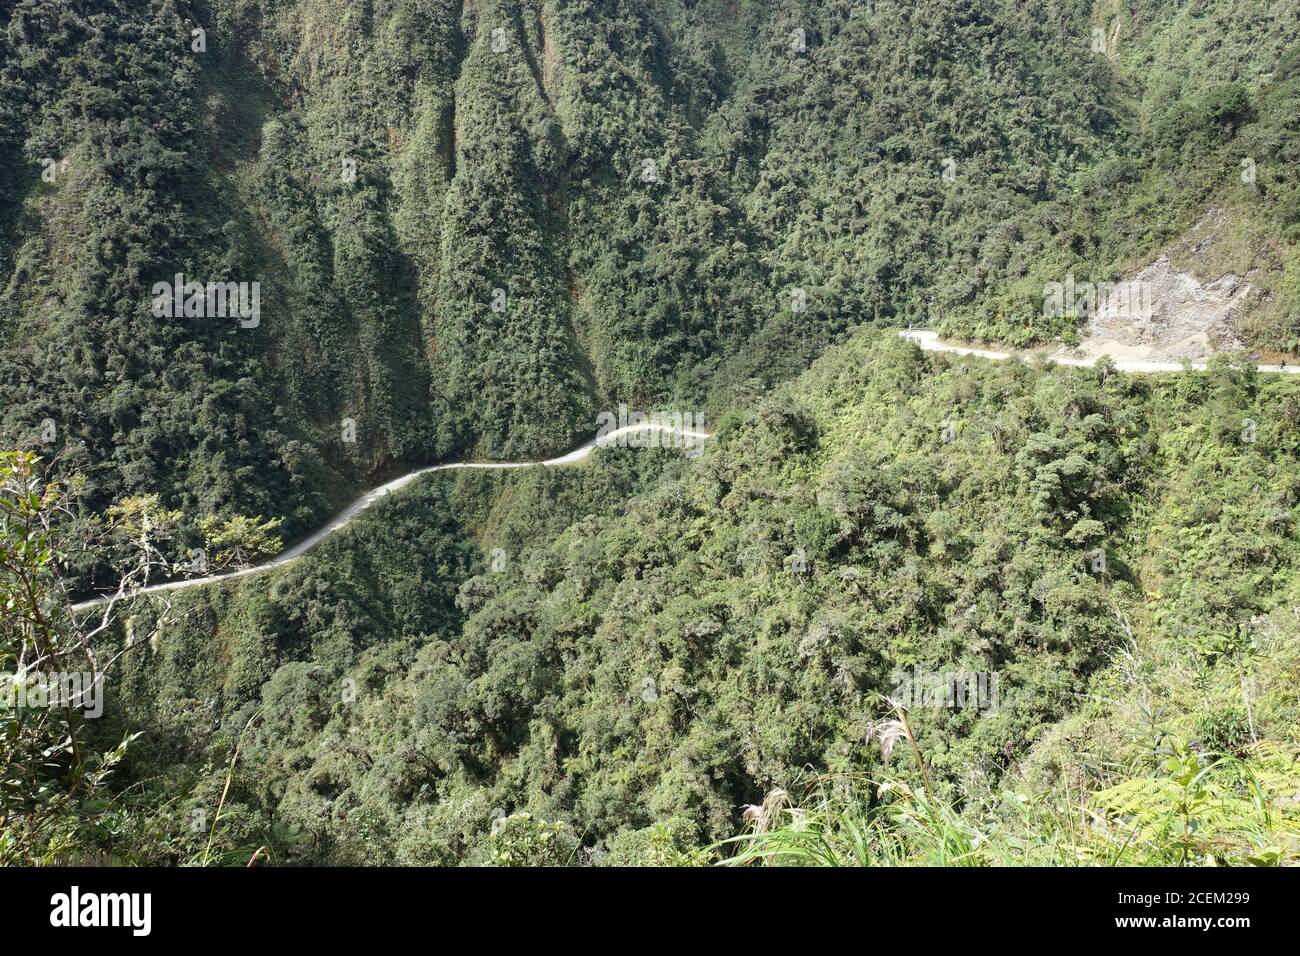 Bolivia Death Road - Downhill mountain Yungas Road panoramic view Stock Photo